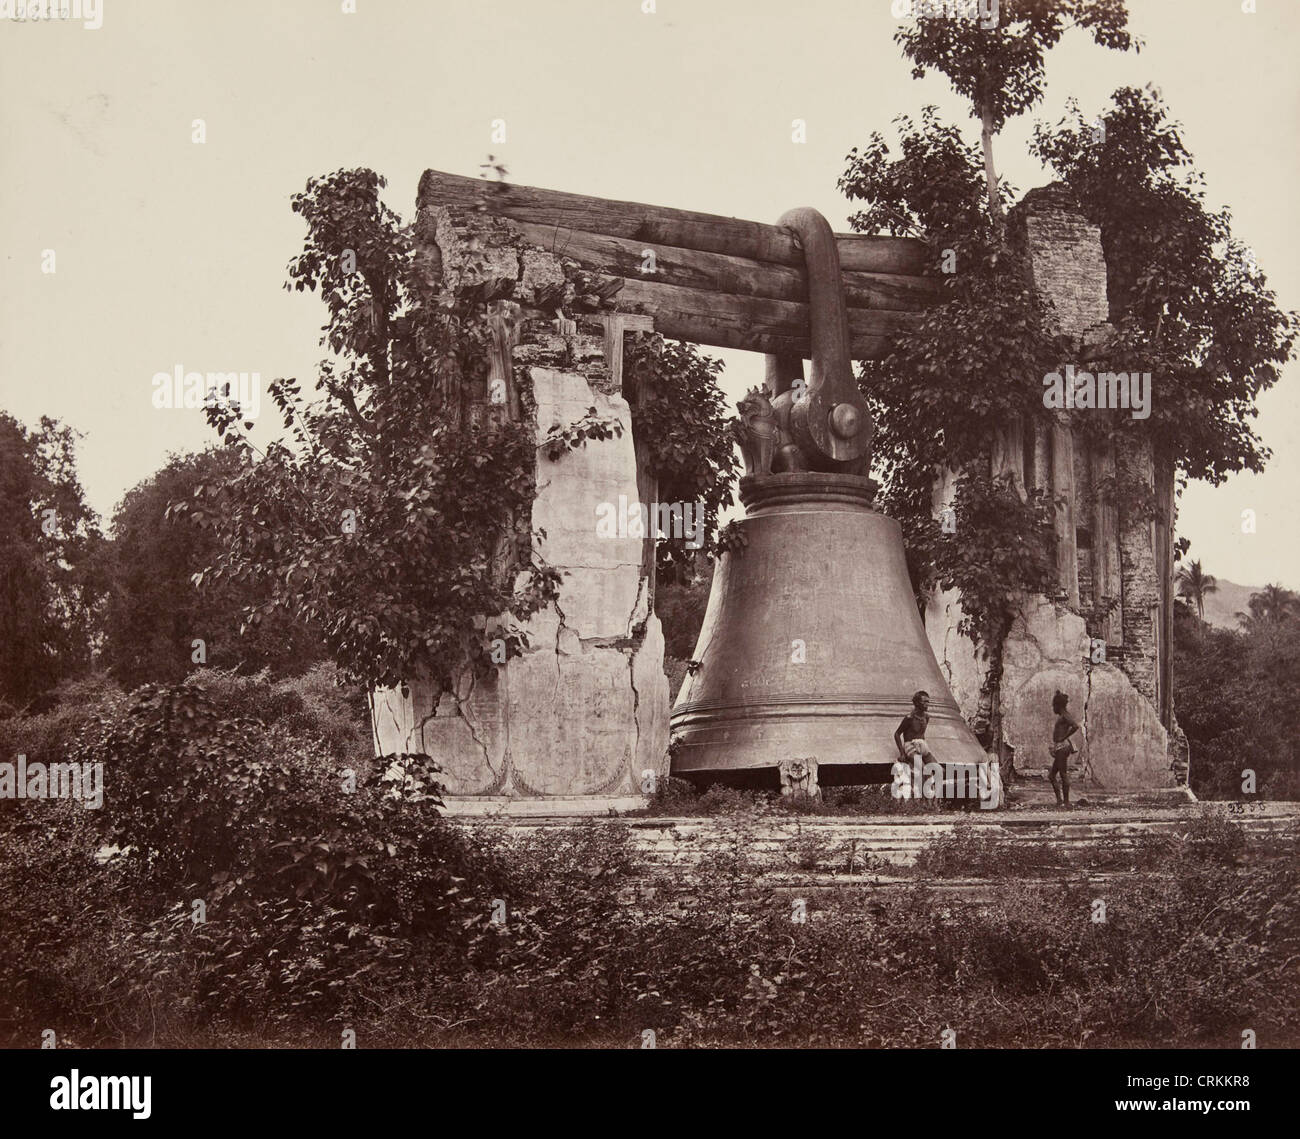 Albumen print of the Mingun Bell in Burma from the Museum of Photographic Arts Stock Photo